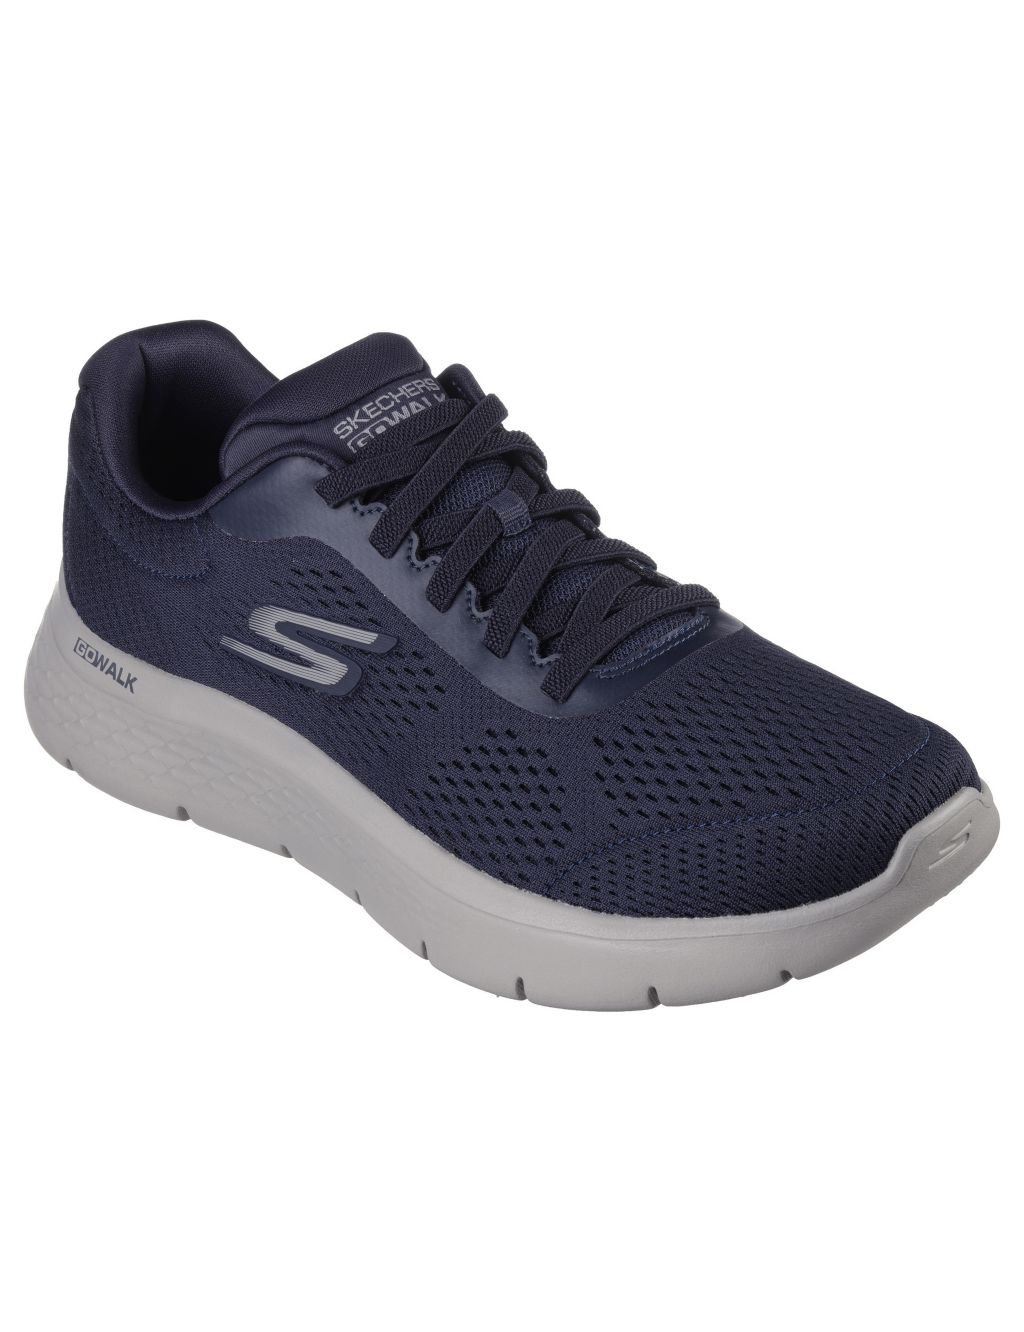 GO WALK Flex Remark Lace Up Trainers image 2